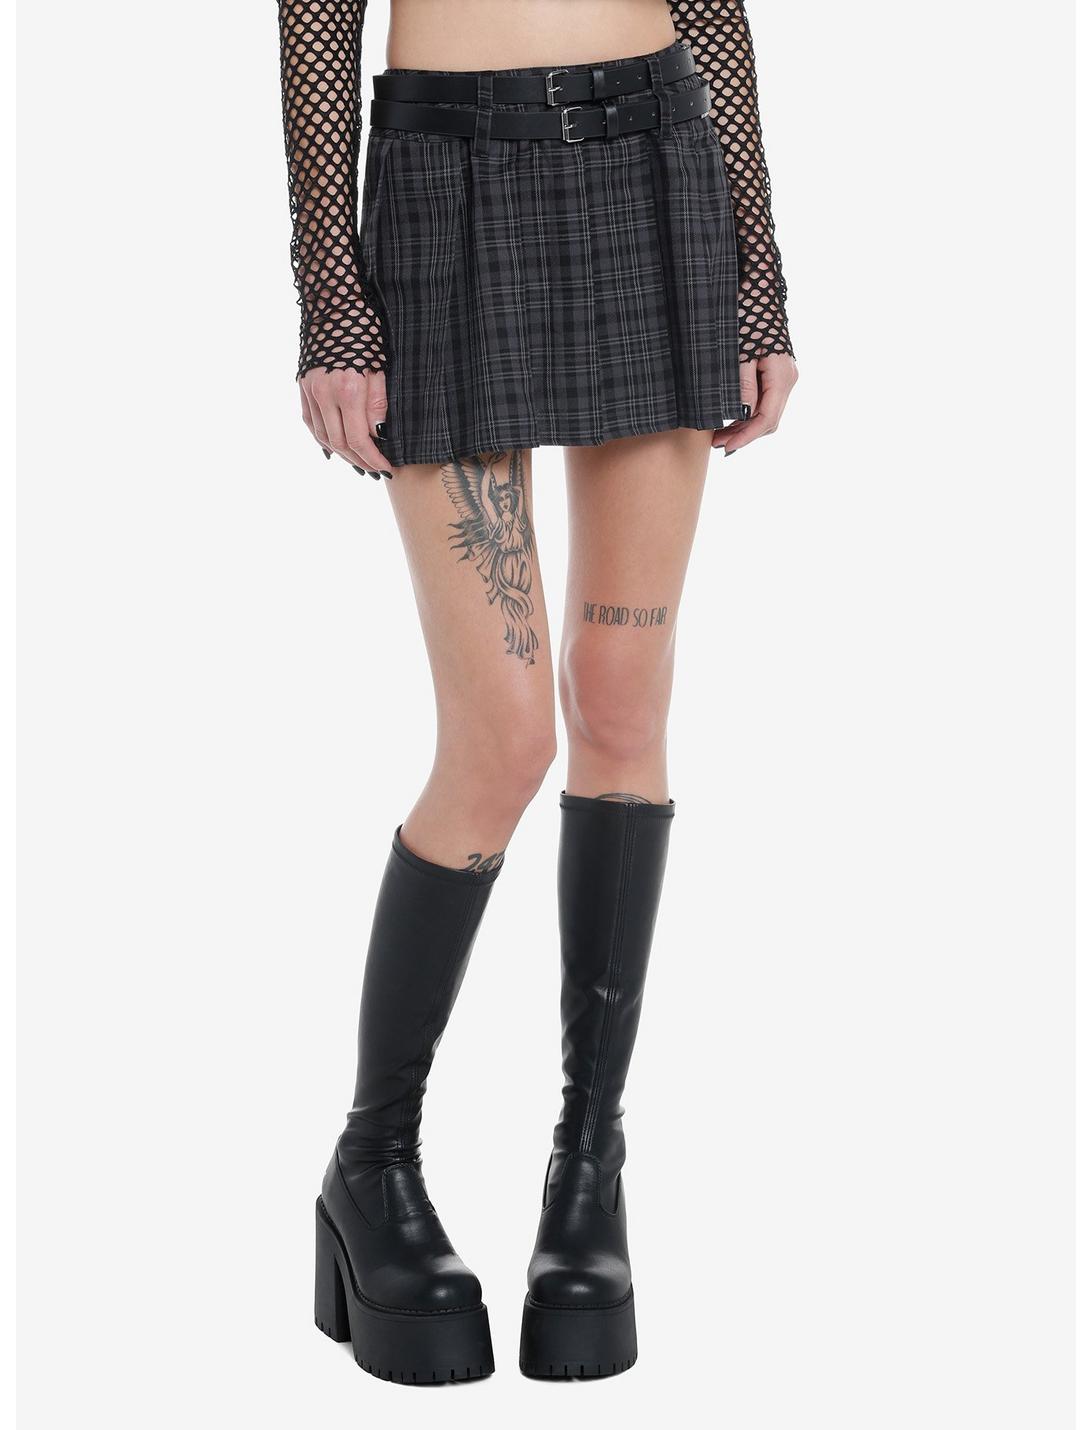 Grey Plaid Double-Belted Mini Skirt, GREY, hi-res